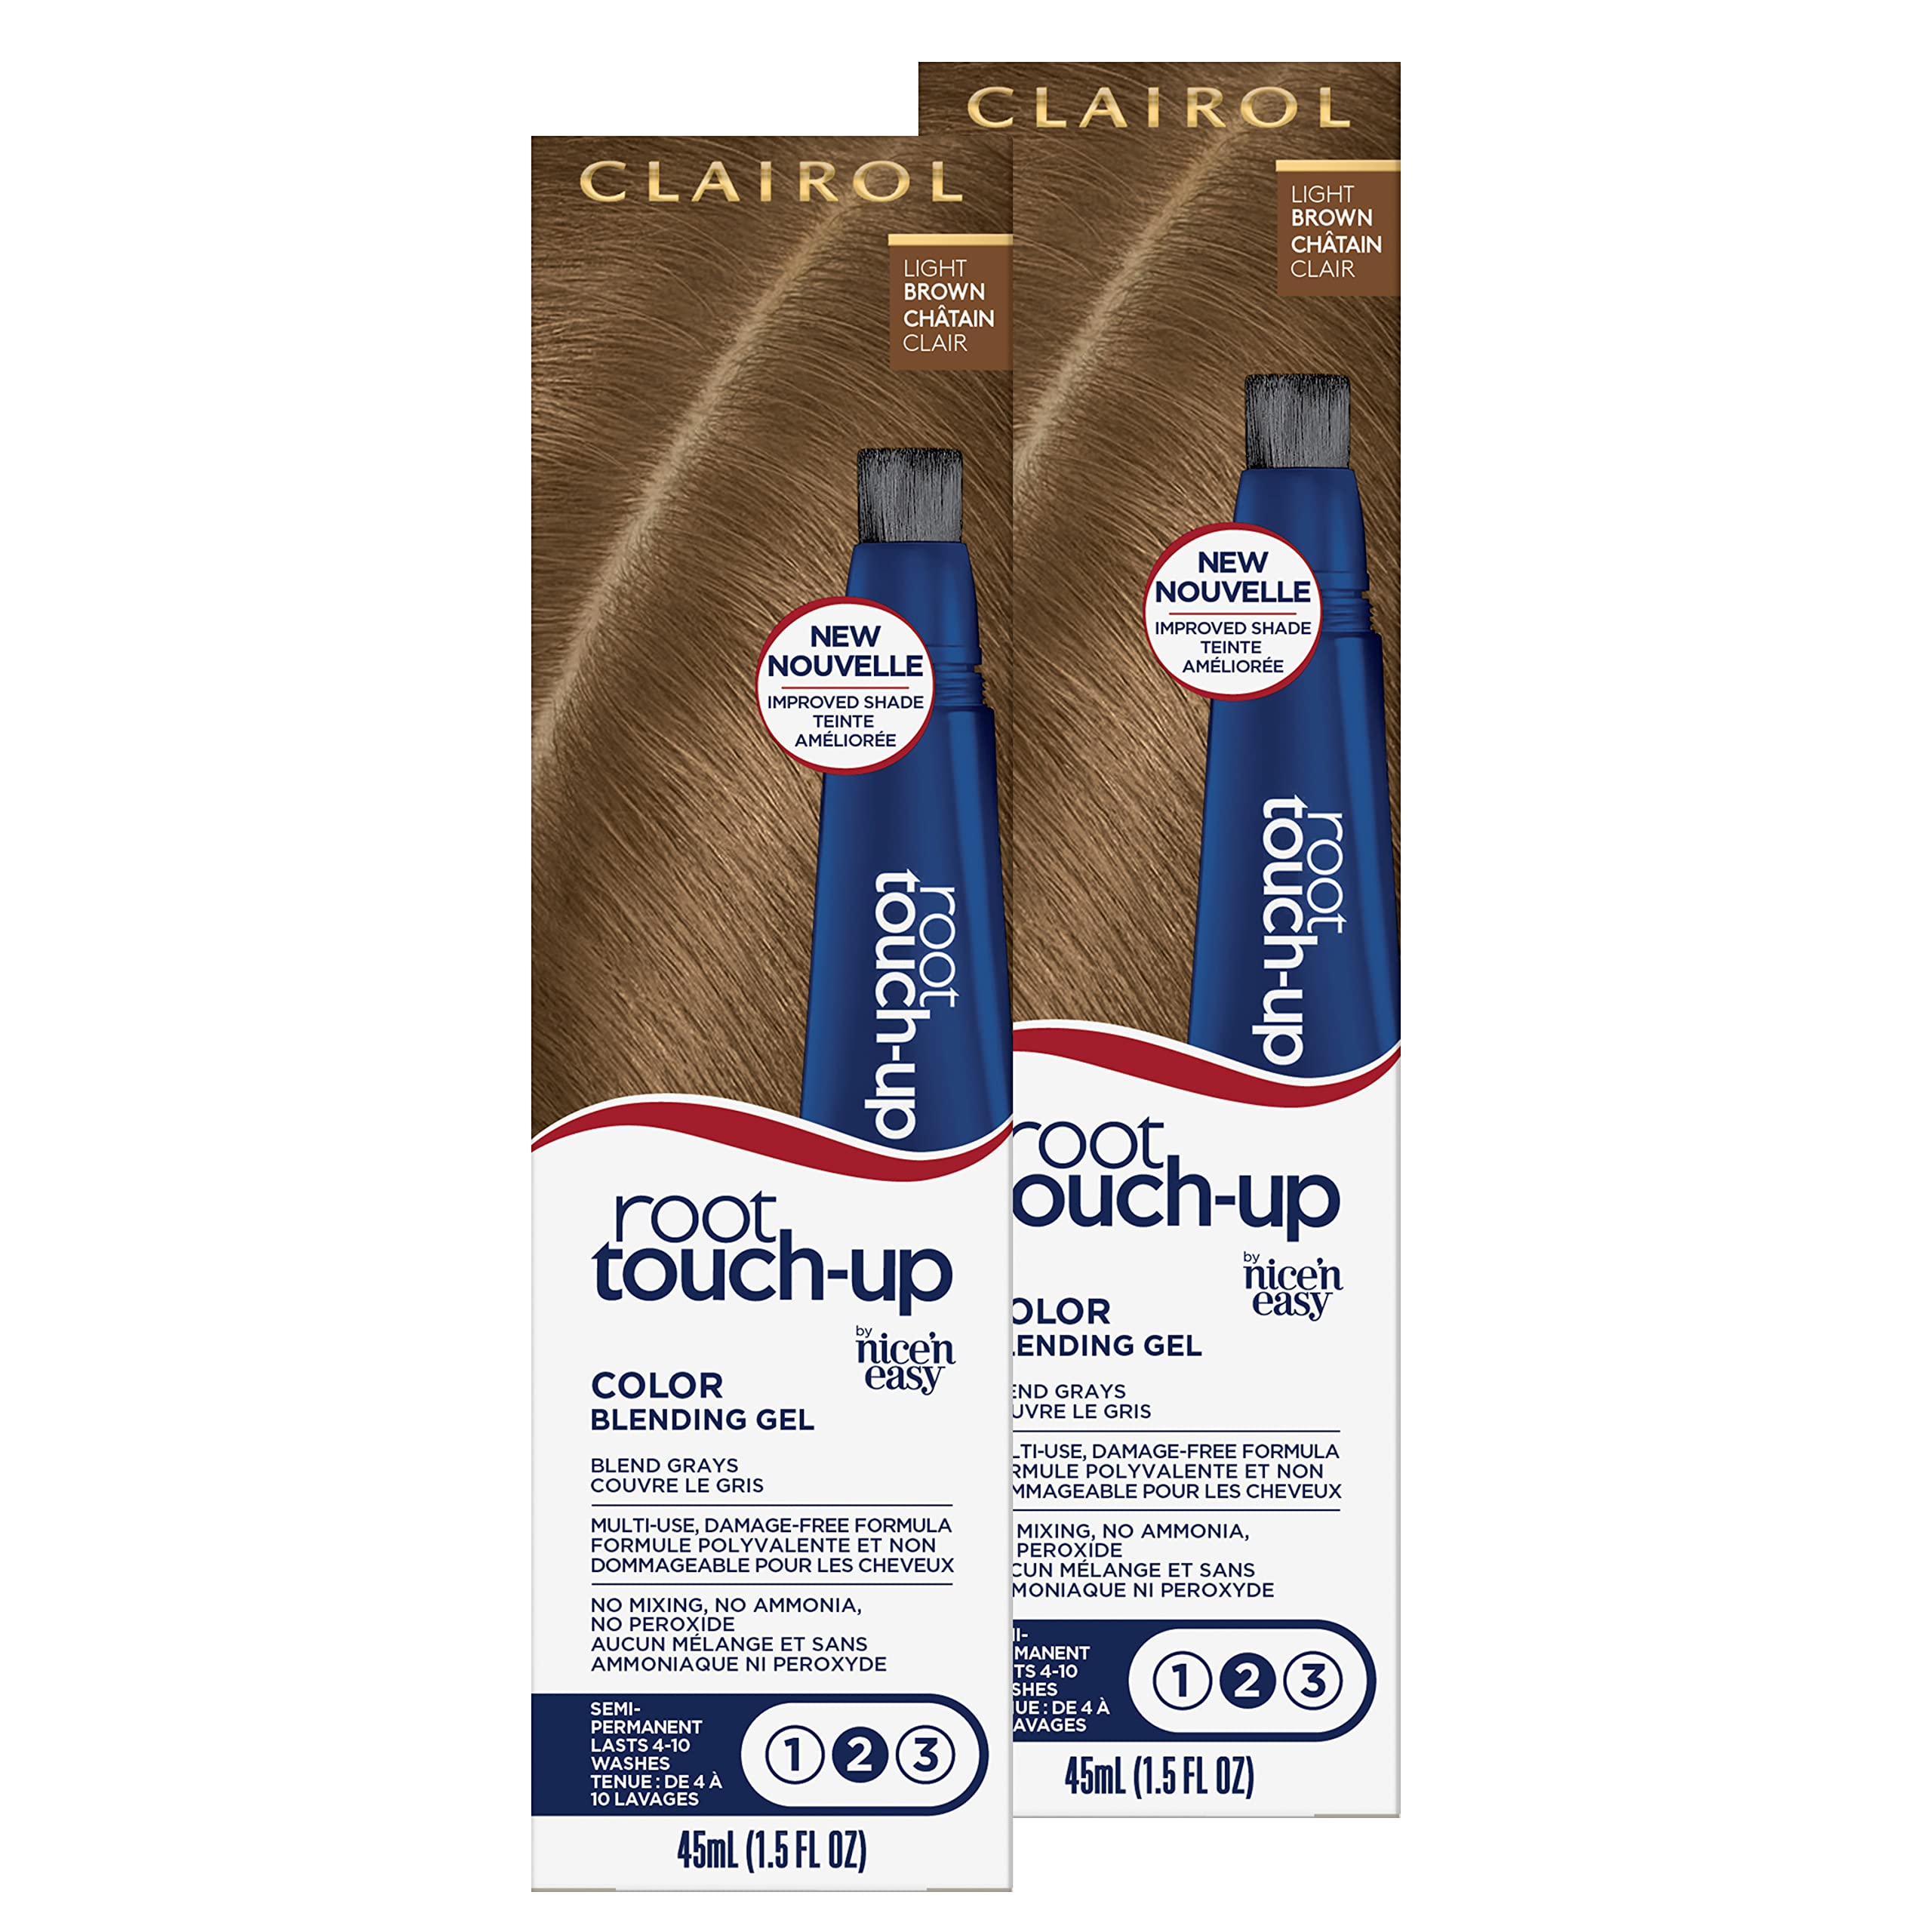 Clairol Root Touch-Up Semi-Permanent Hair Color Blending Gel, 6 Light Brown, Pack of 2